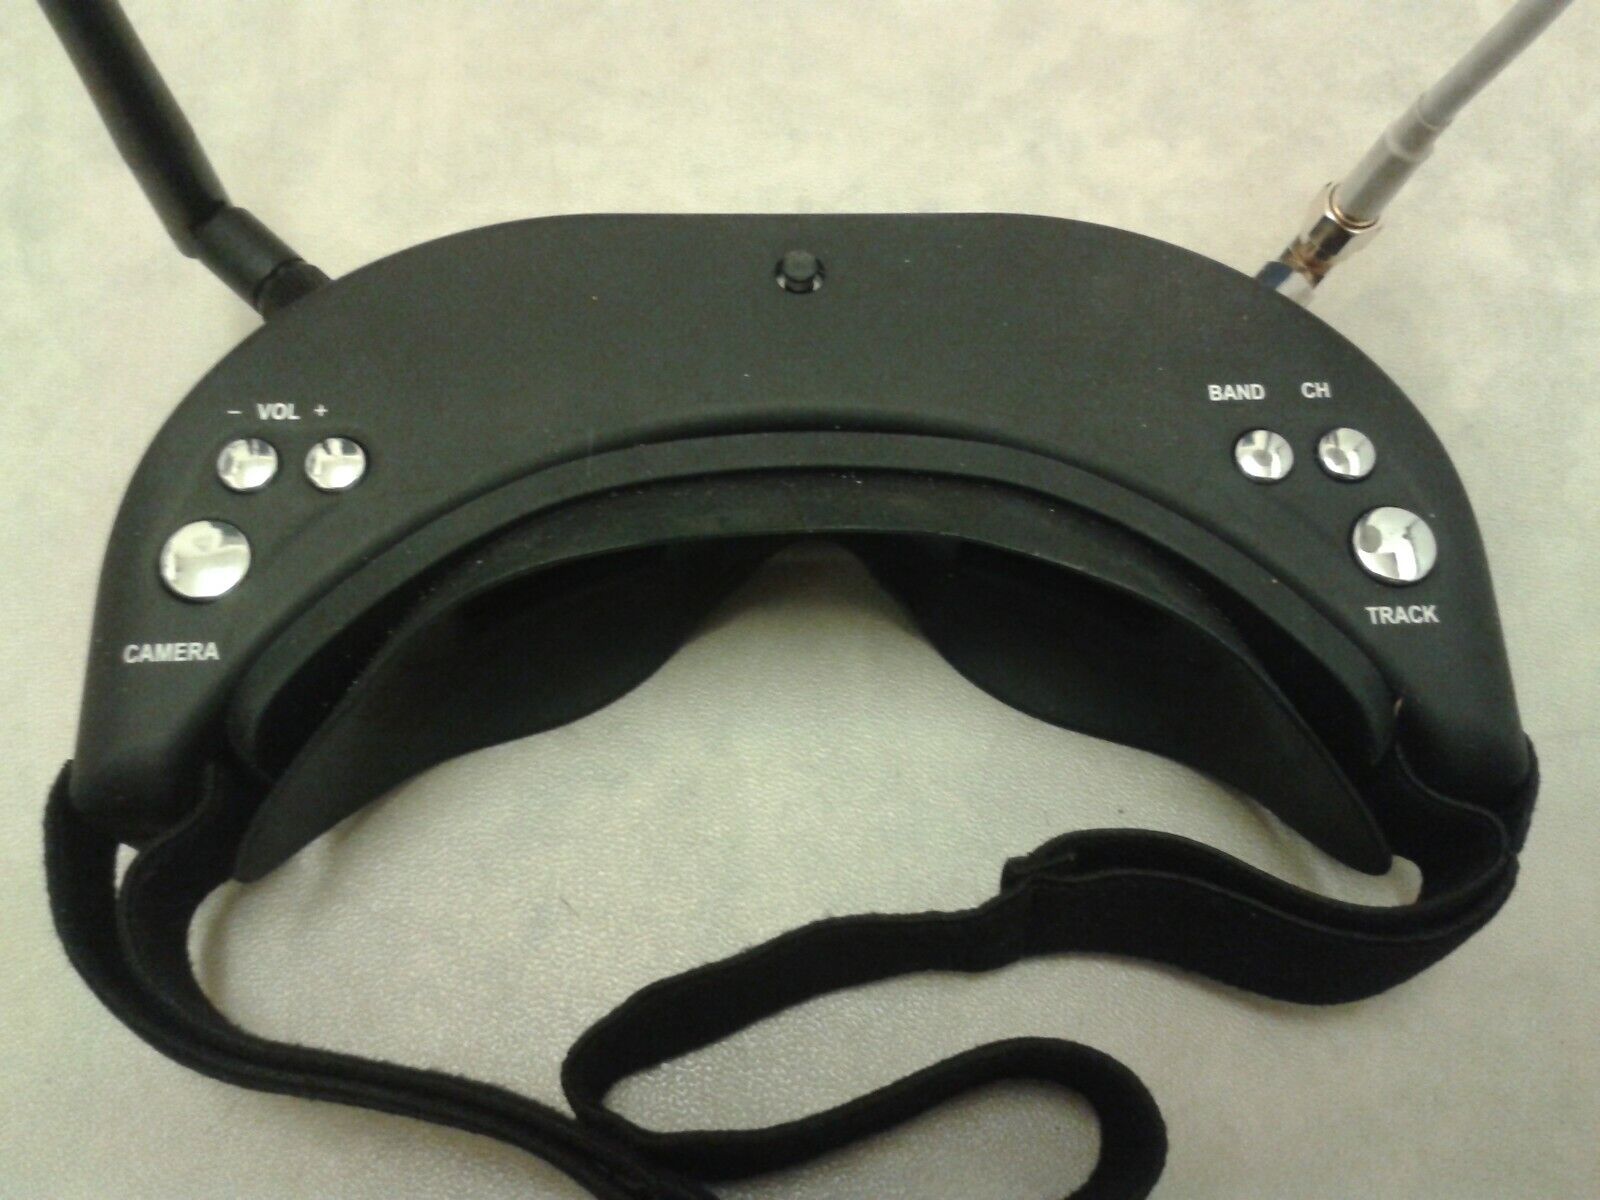 SKY01 FPV Goggles for RC Drones